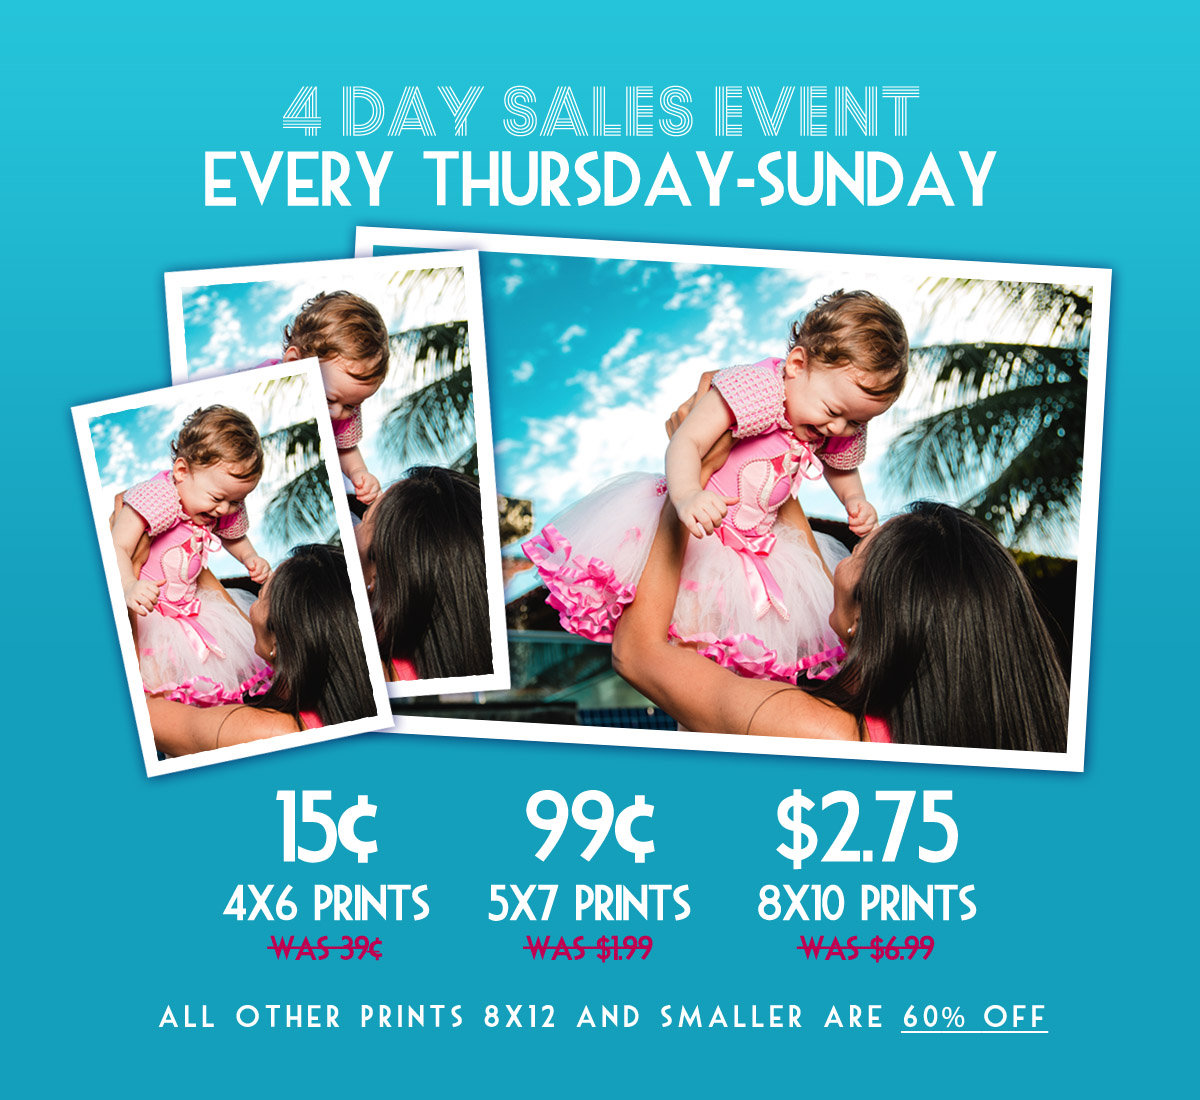 **EXTENDED: You guys liked our Four-Day Sales event so much, we’re going to keep it going for this month, as well! Every Thursday-Sunday 4x6 prints are 15¢, 5x7 prints are 99¢, and larger 8x10 prints are $2.75. Similar sizes are 60% off! Matte and Gloss prints alike; discounts available online!